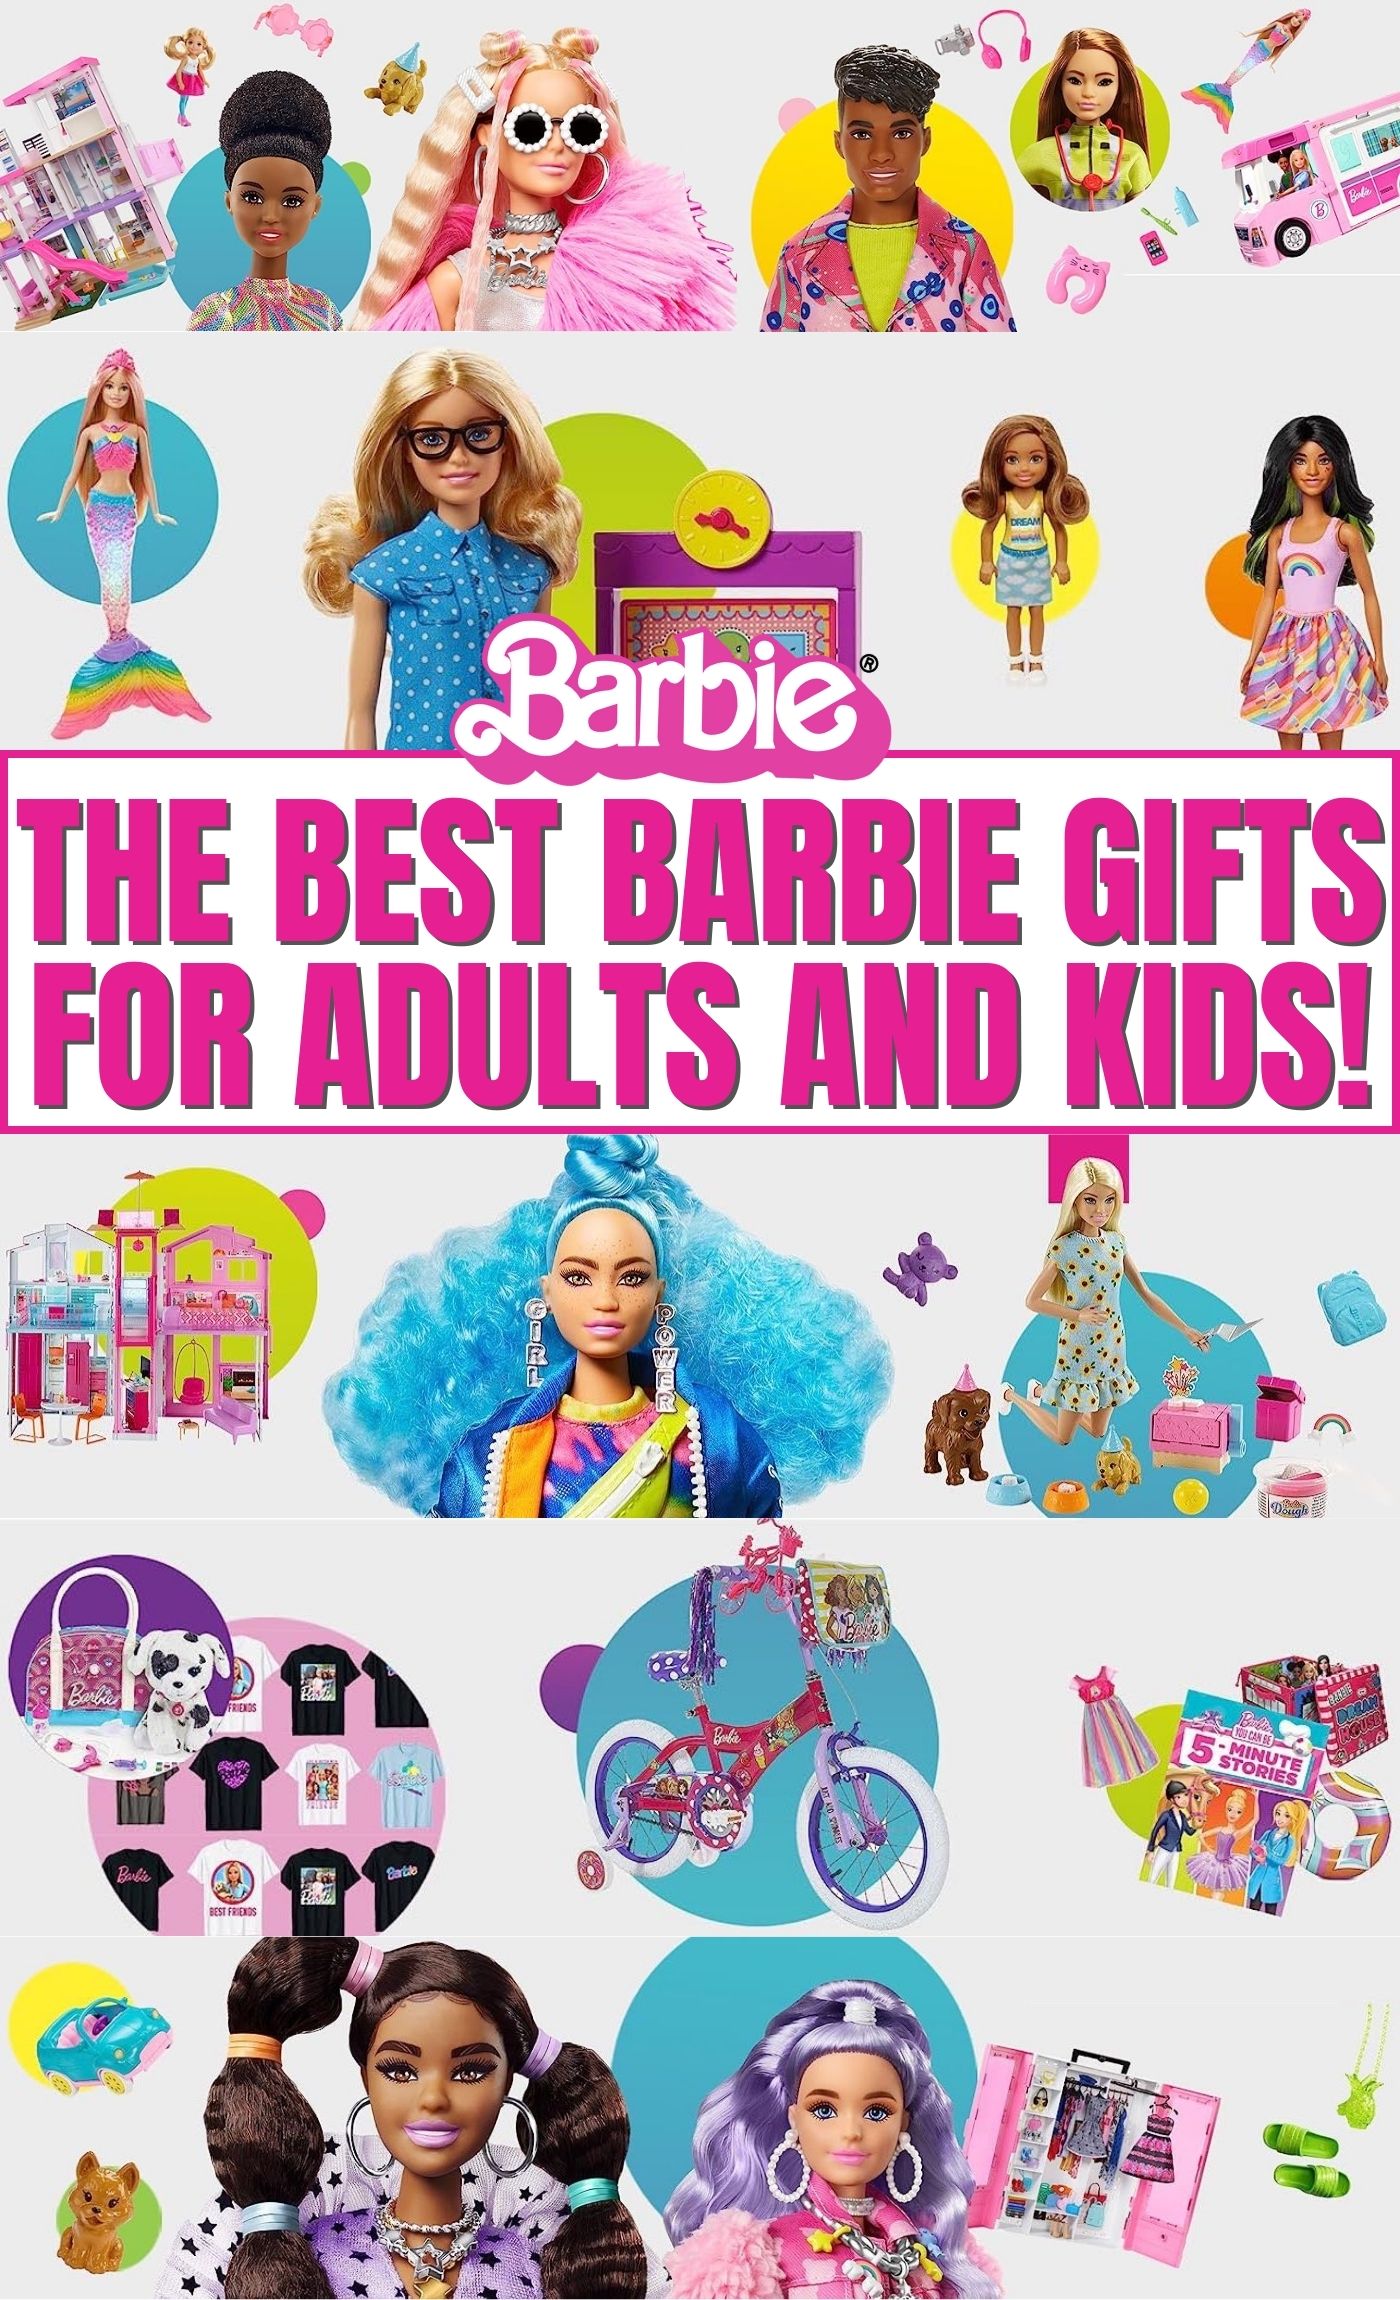 BARBIE GIFTS FOR ADULTS